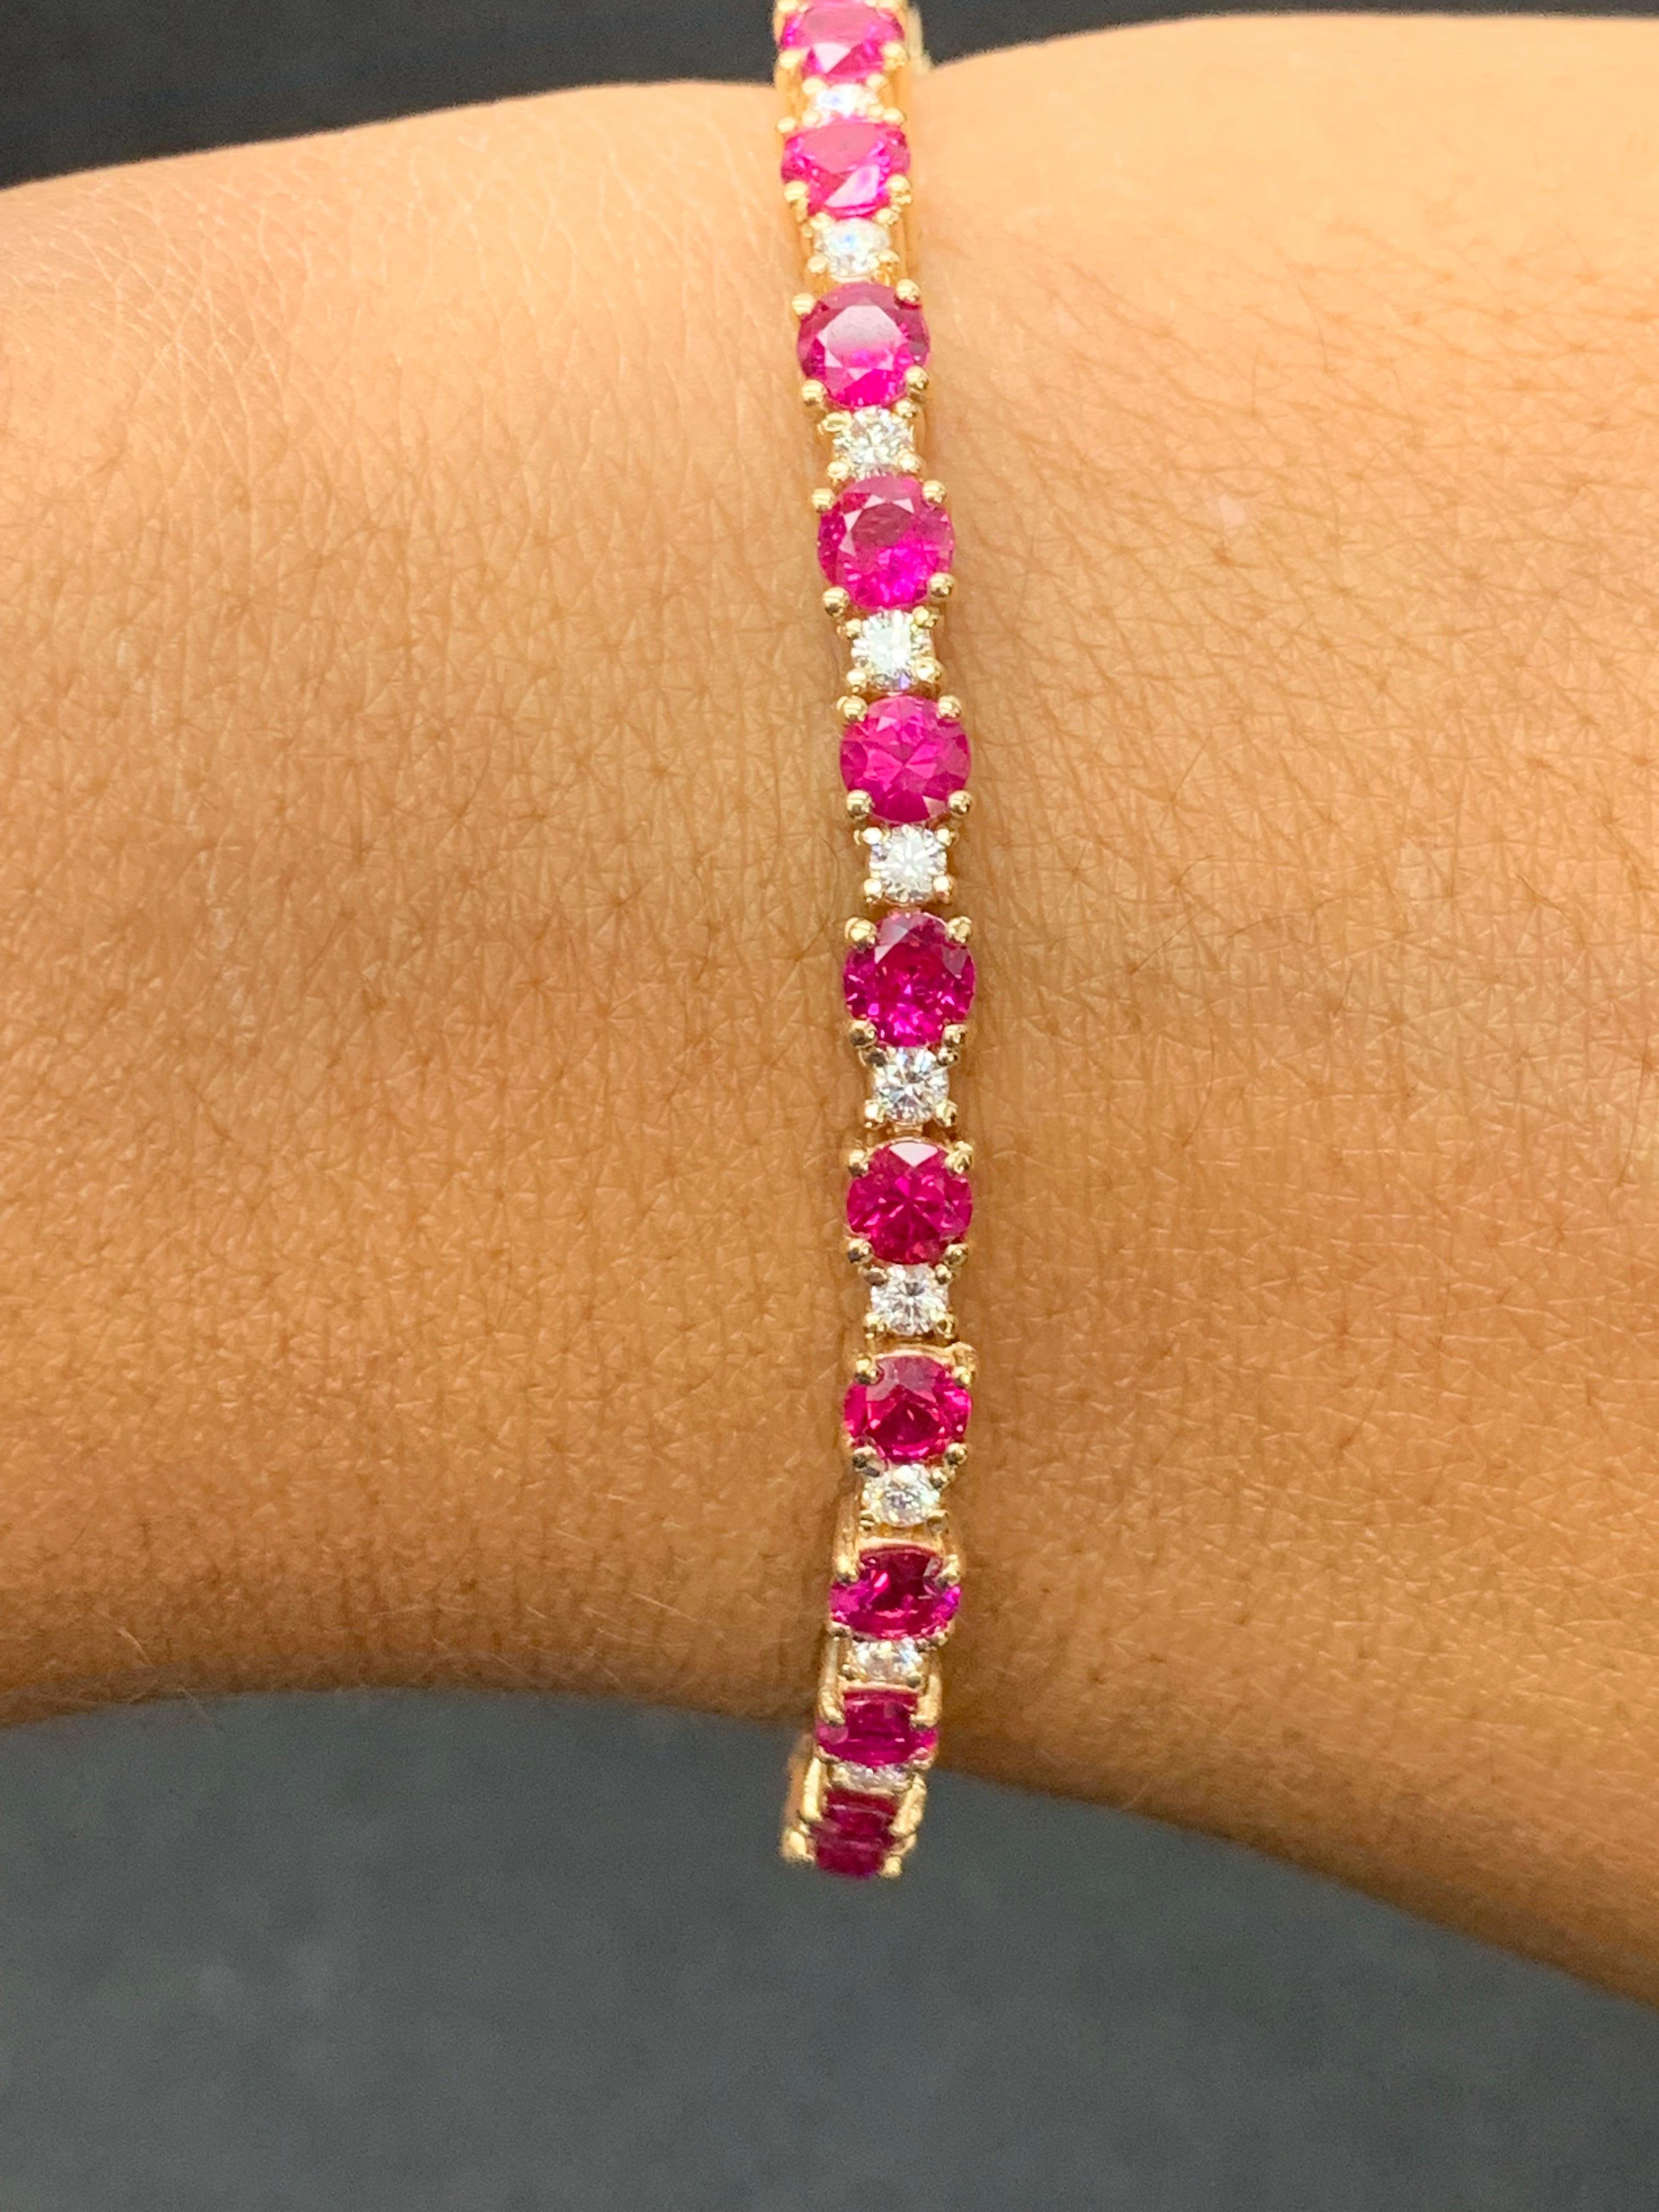 Showcasing 8.70 carats total of 28 red rubies, elegantly alternating with 1.40 carats of 28 round brilliant diamonds. Made in 14 karat yellow gold.

Style available in different price ranges. Prices are based on your selection of the 4C’s (Carat,